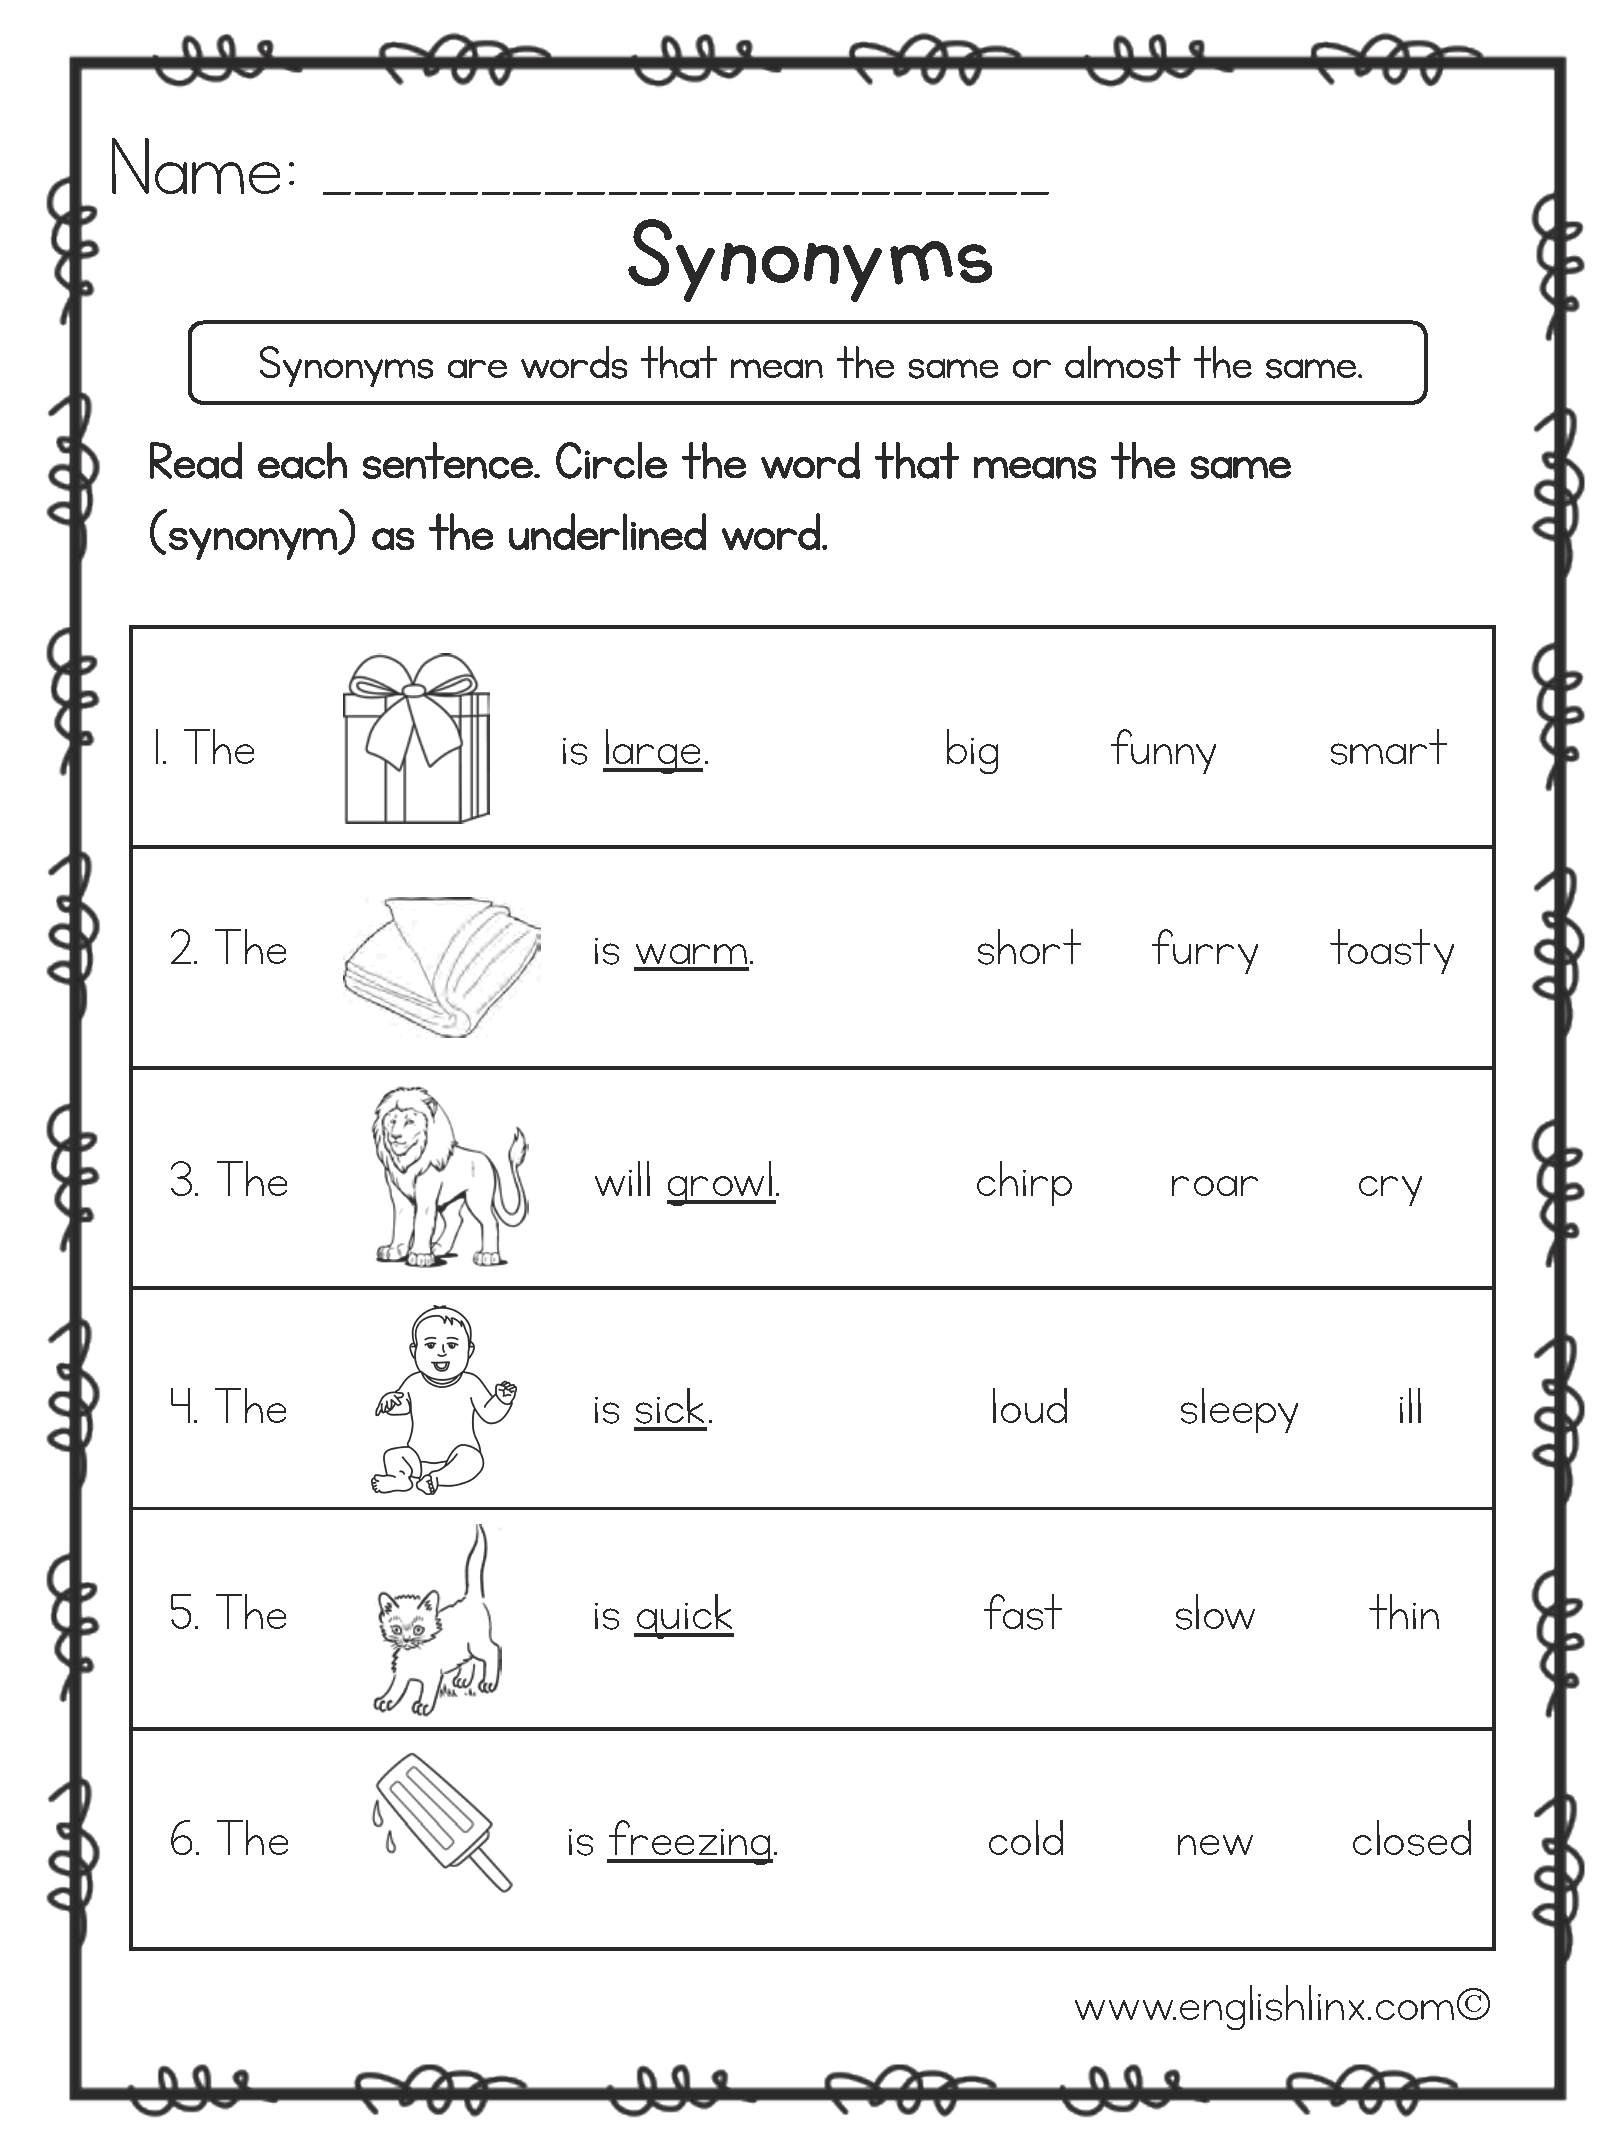 Synonyms Worksheet 2nd Grade 579308